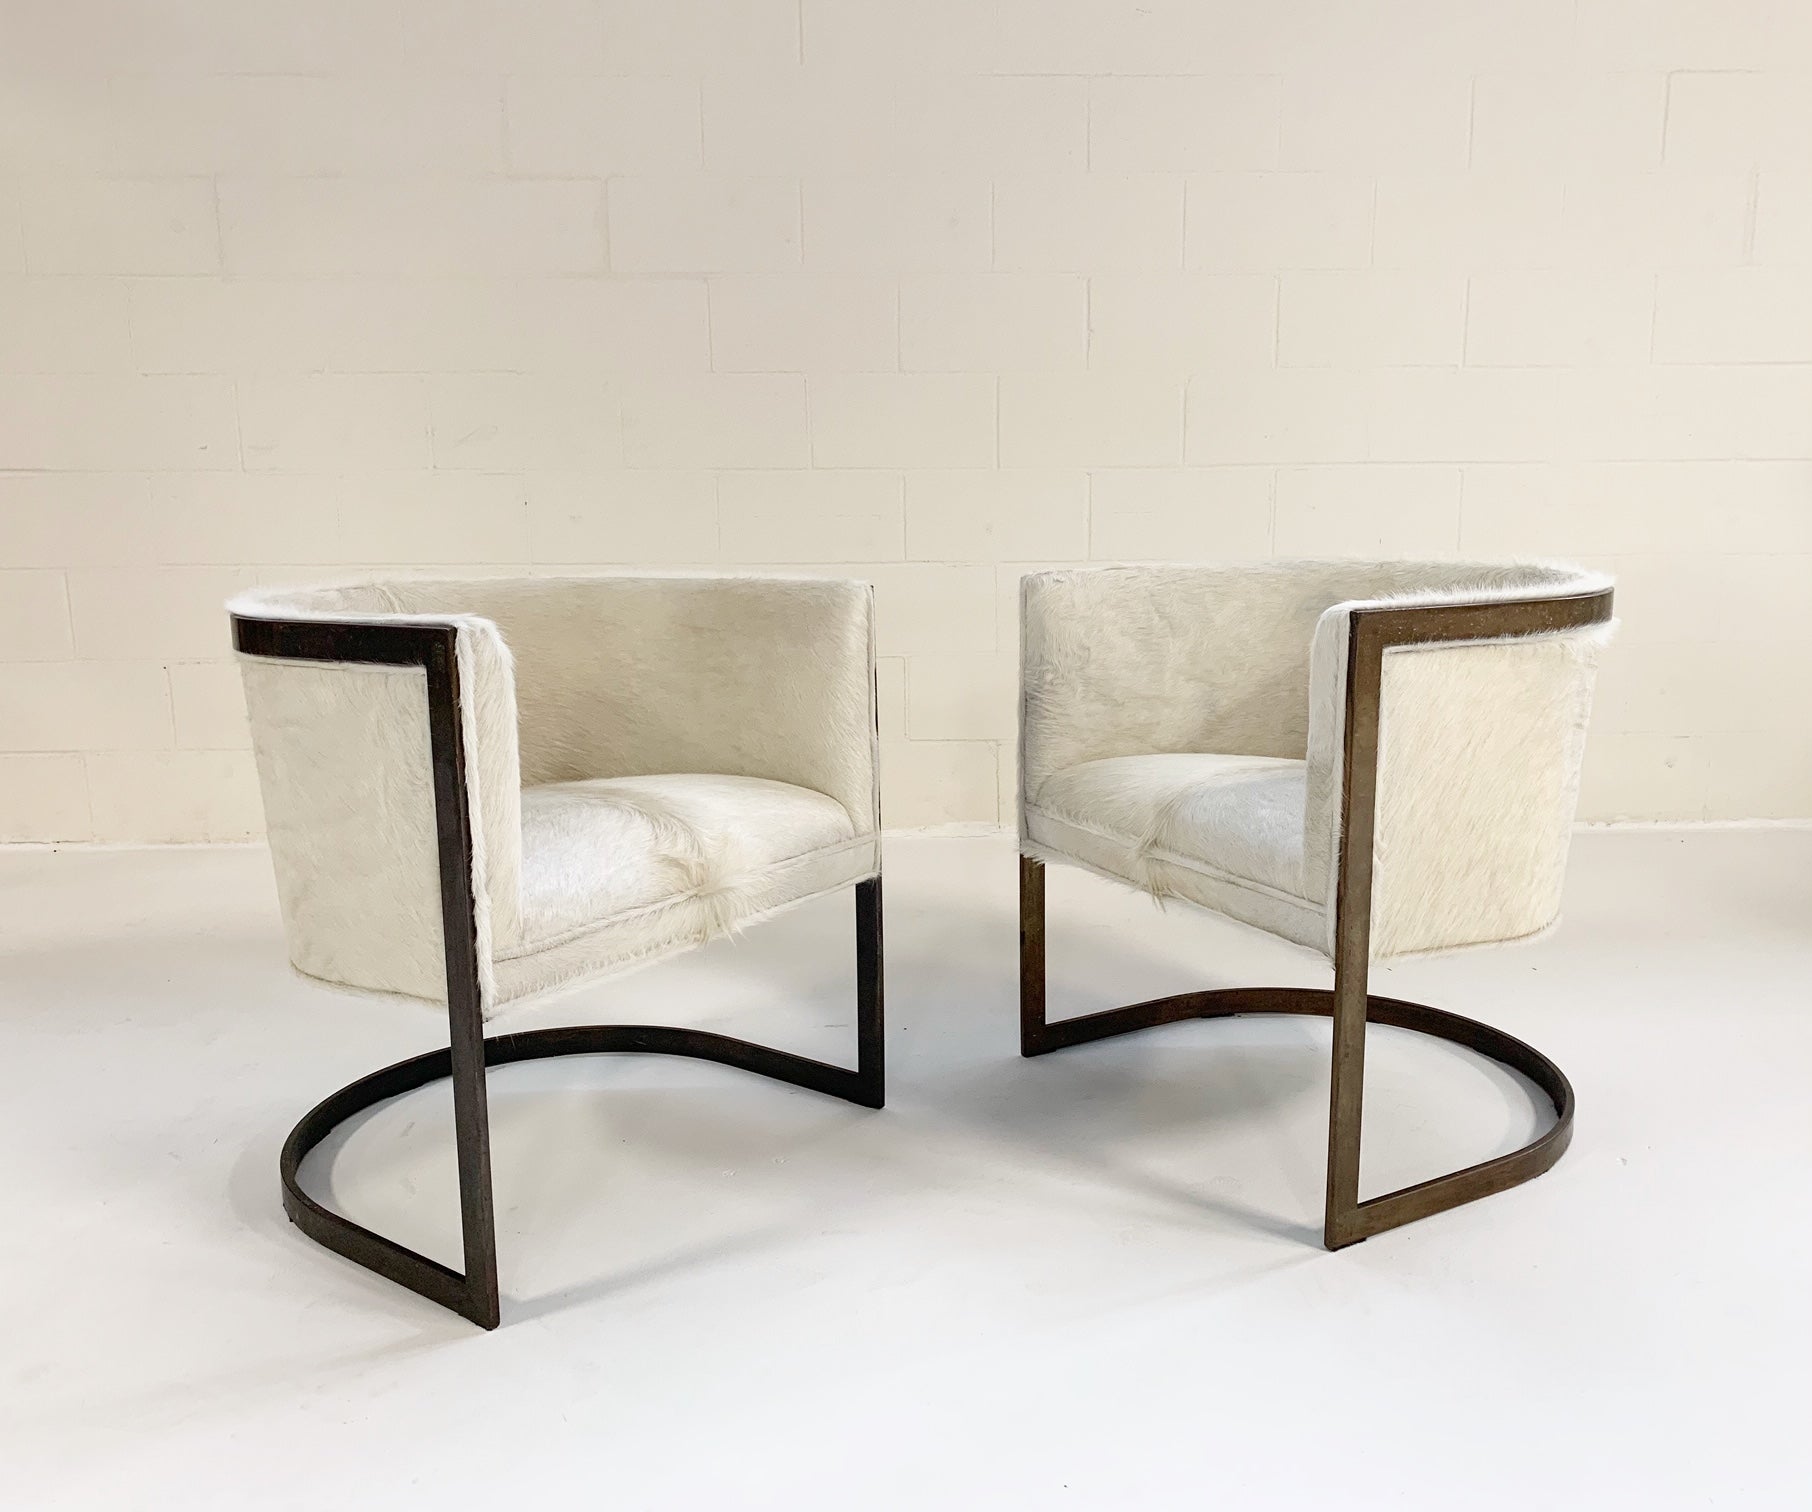 Brass Armchairs in Brazilian Cowhide, pair - FORSYTH